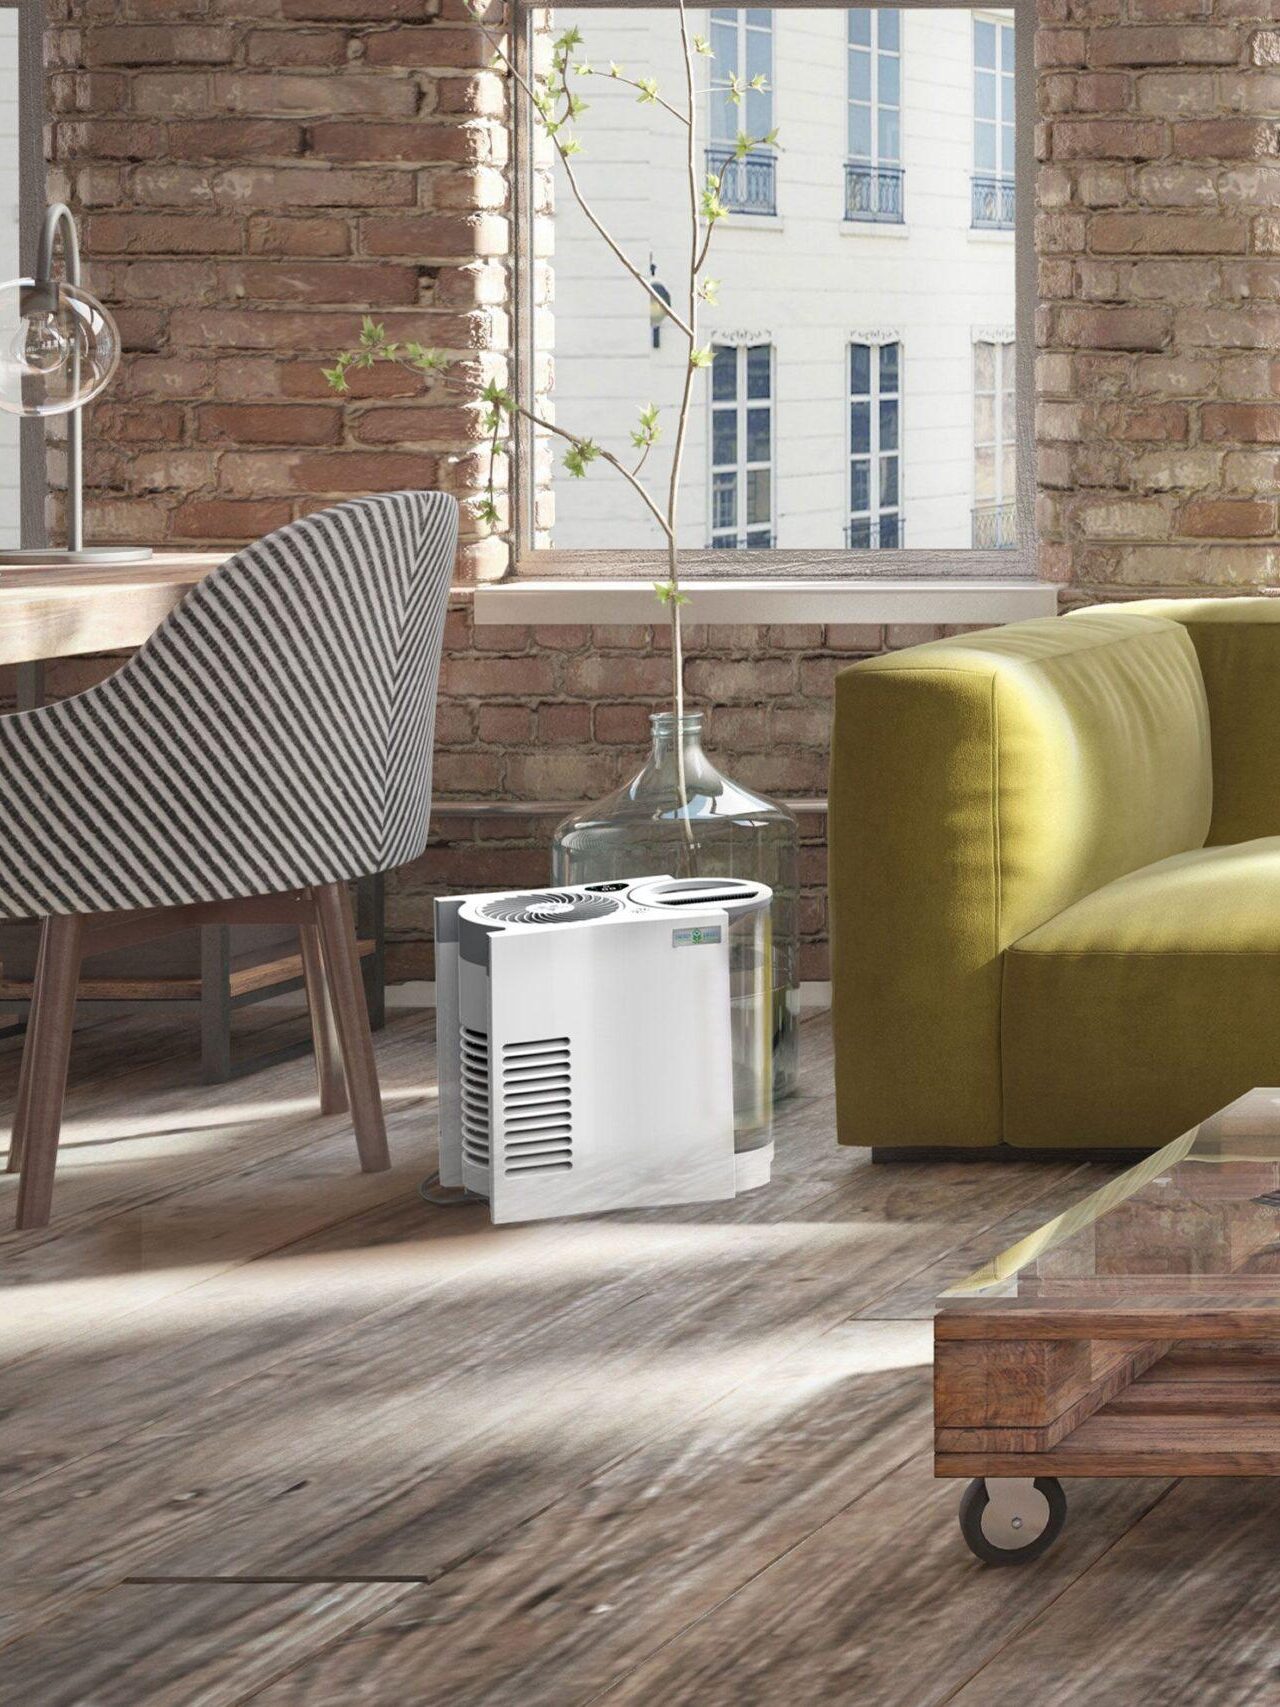 A Vornado Air Purifier and Humidifier in a living room.